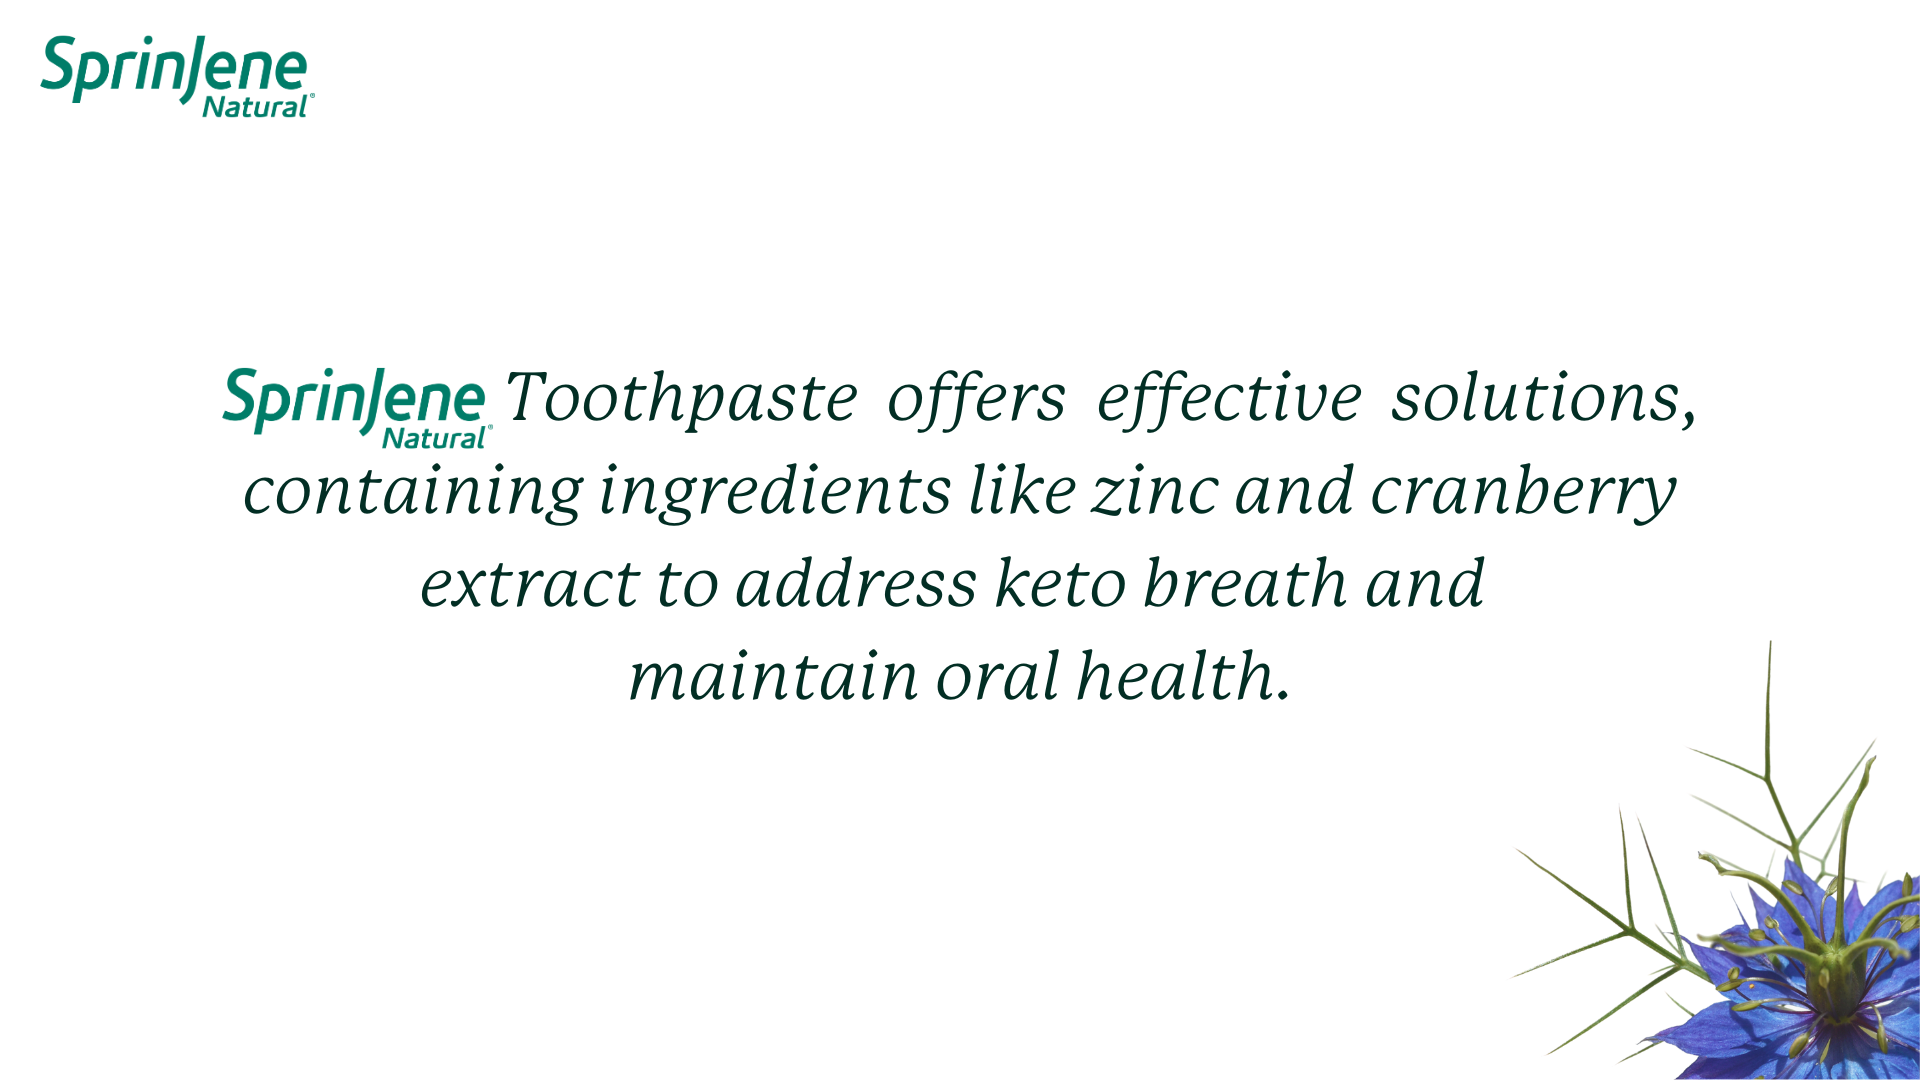 SprinJene Toothpaste offers effective solutions to address keto breath